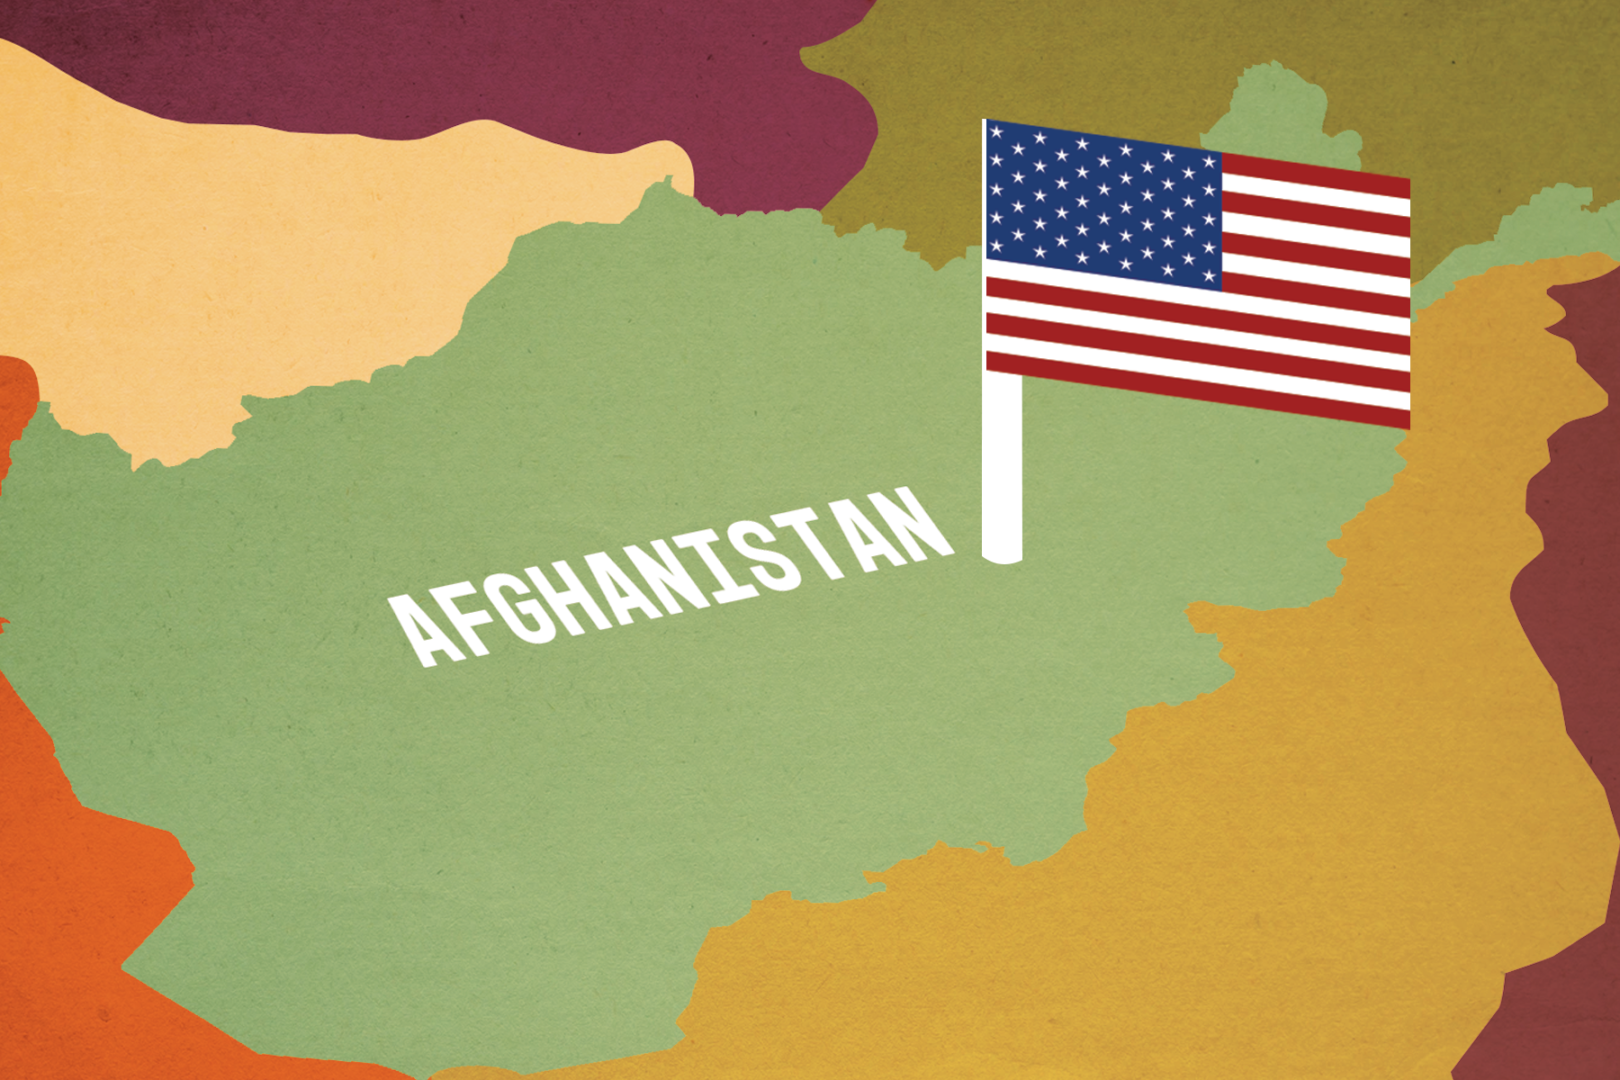 Americans need to acknowledge the role the U.S. played in Afghanistan